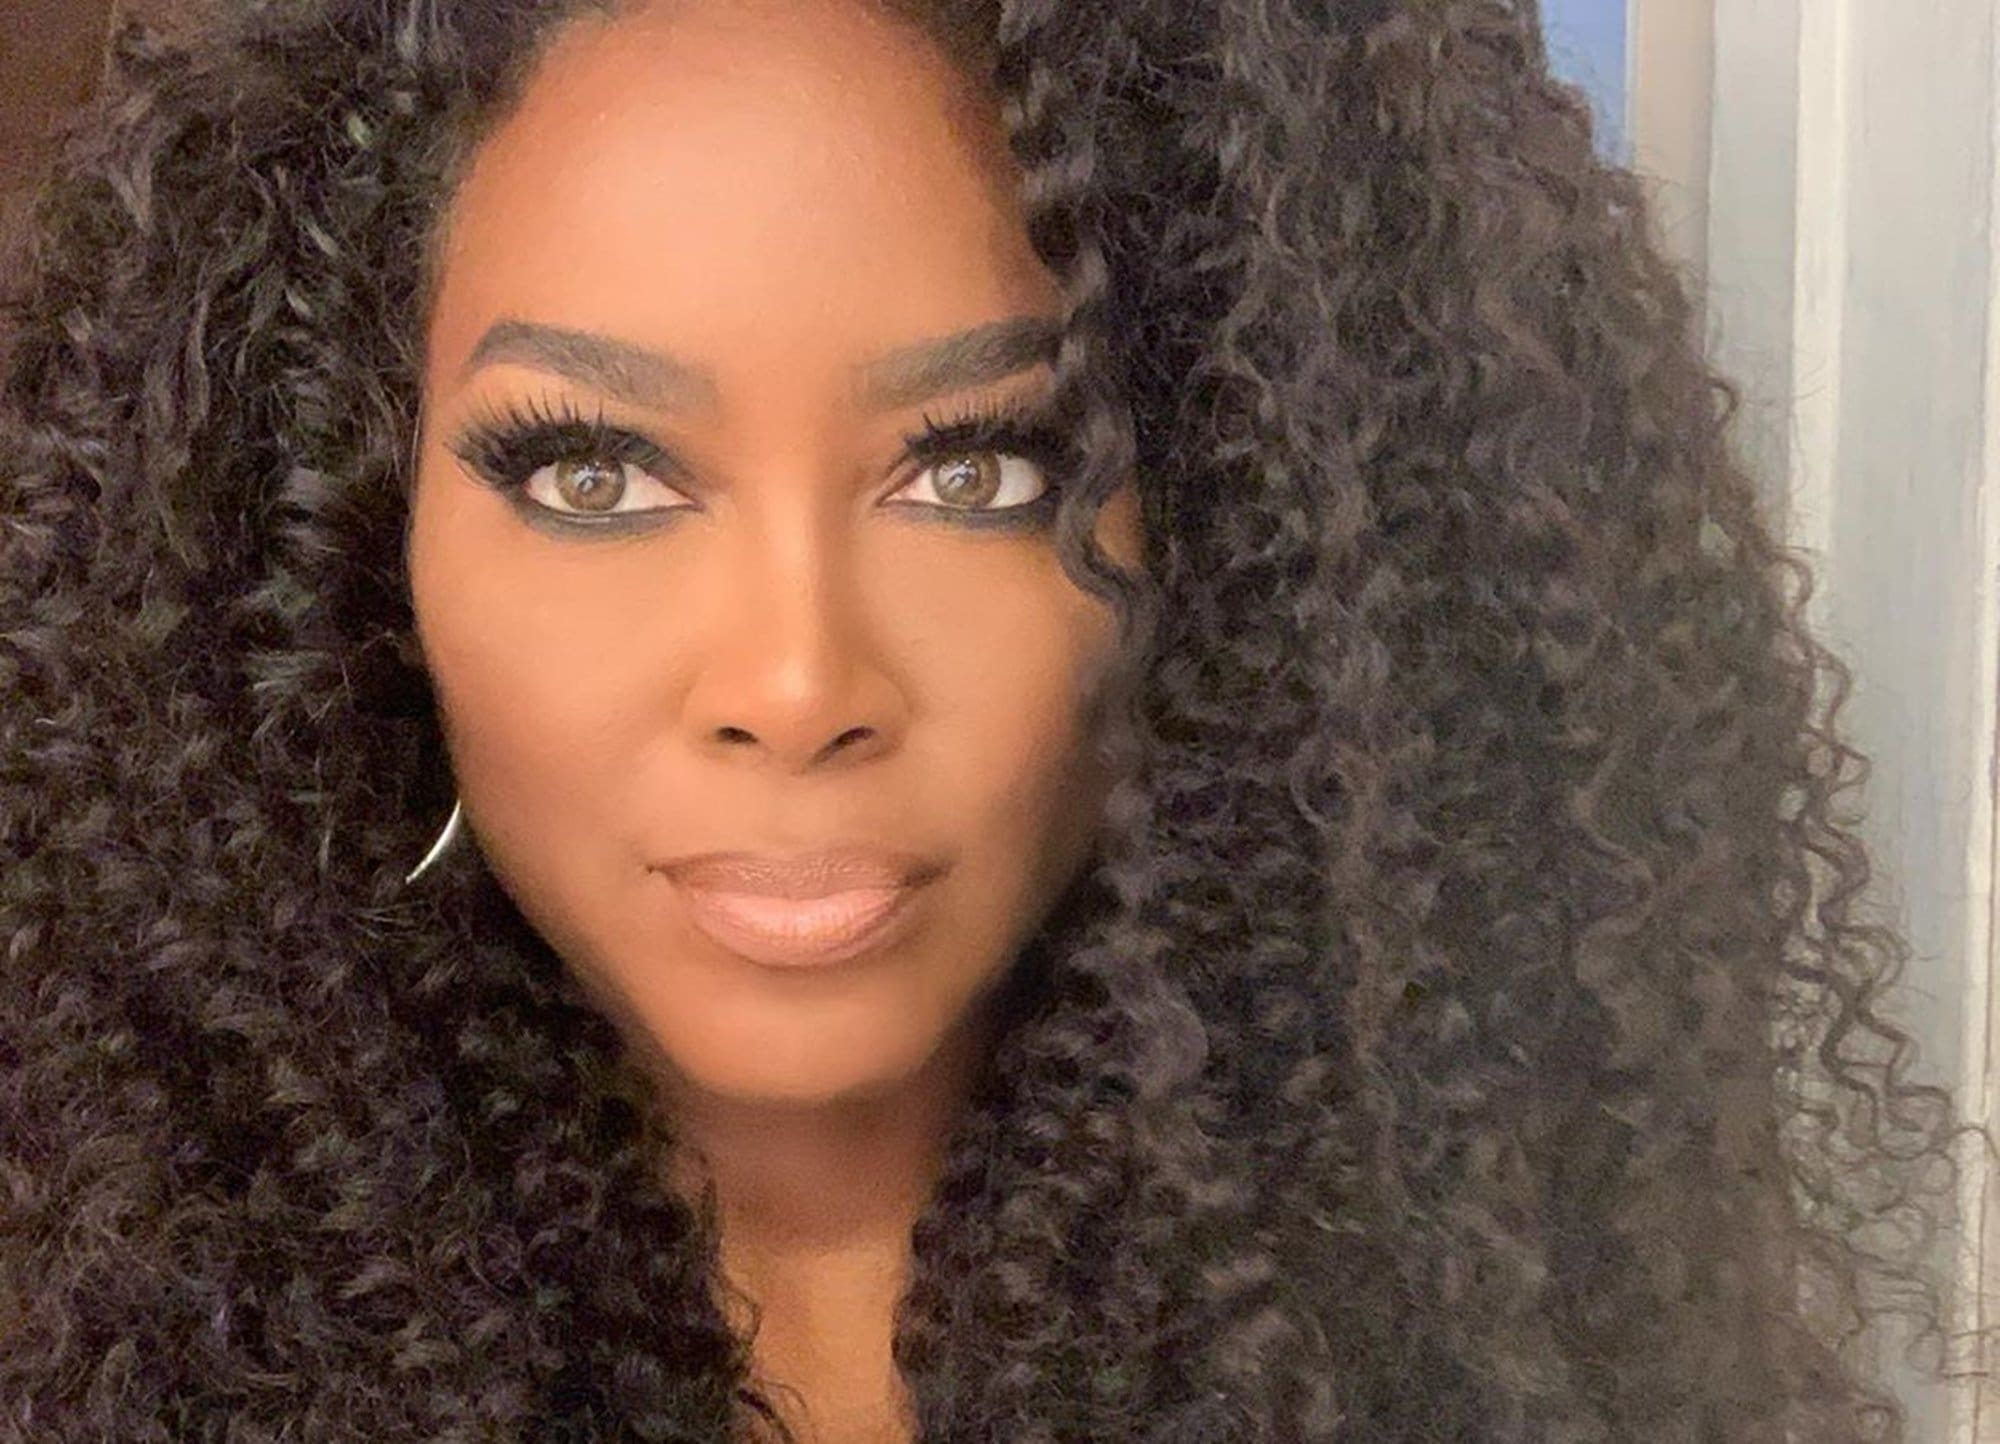 Kenya Moore Reveals The Empire She's Building For Her Daughter, Brooklyn Daly: 'This Is My Legacy'